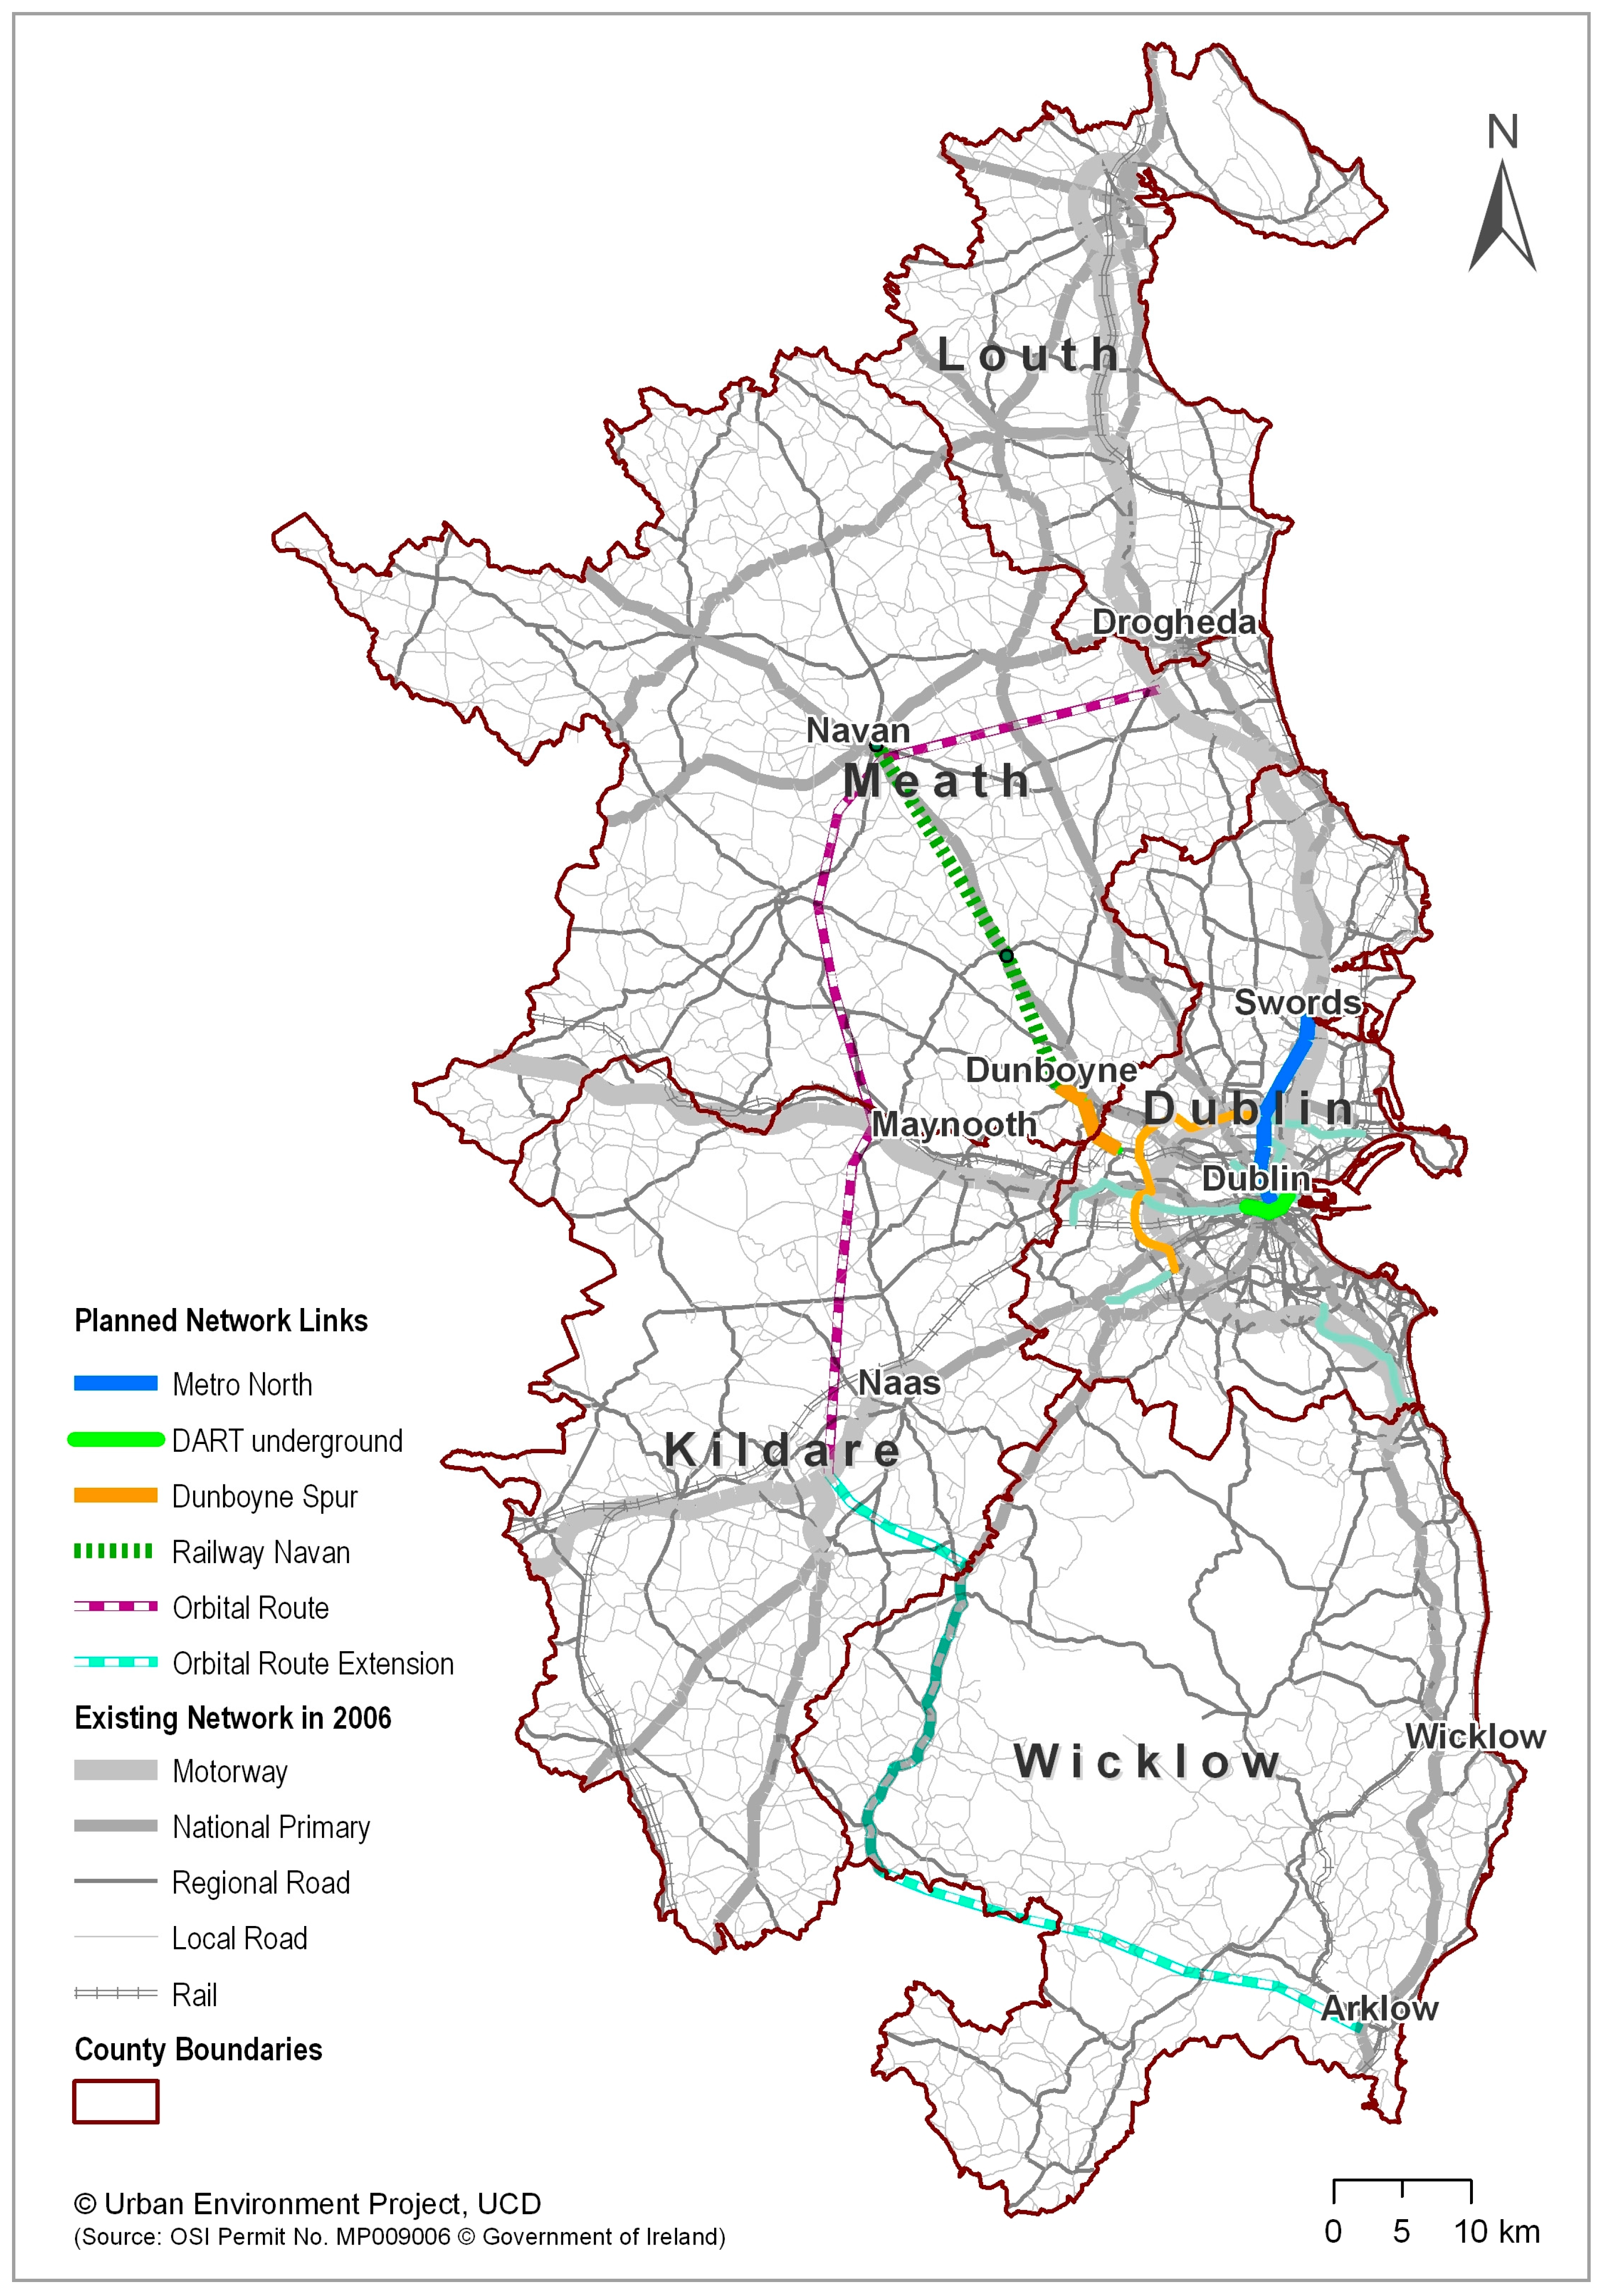 Sustainability Free Full Text Developing And Assessing Alternative Land Use Scenarios From The Moland Model A Scenario Based Impact Analysis Approach For The Evaluation Of Rapid Rail Provisions And Urban Development In The